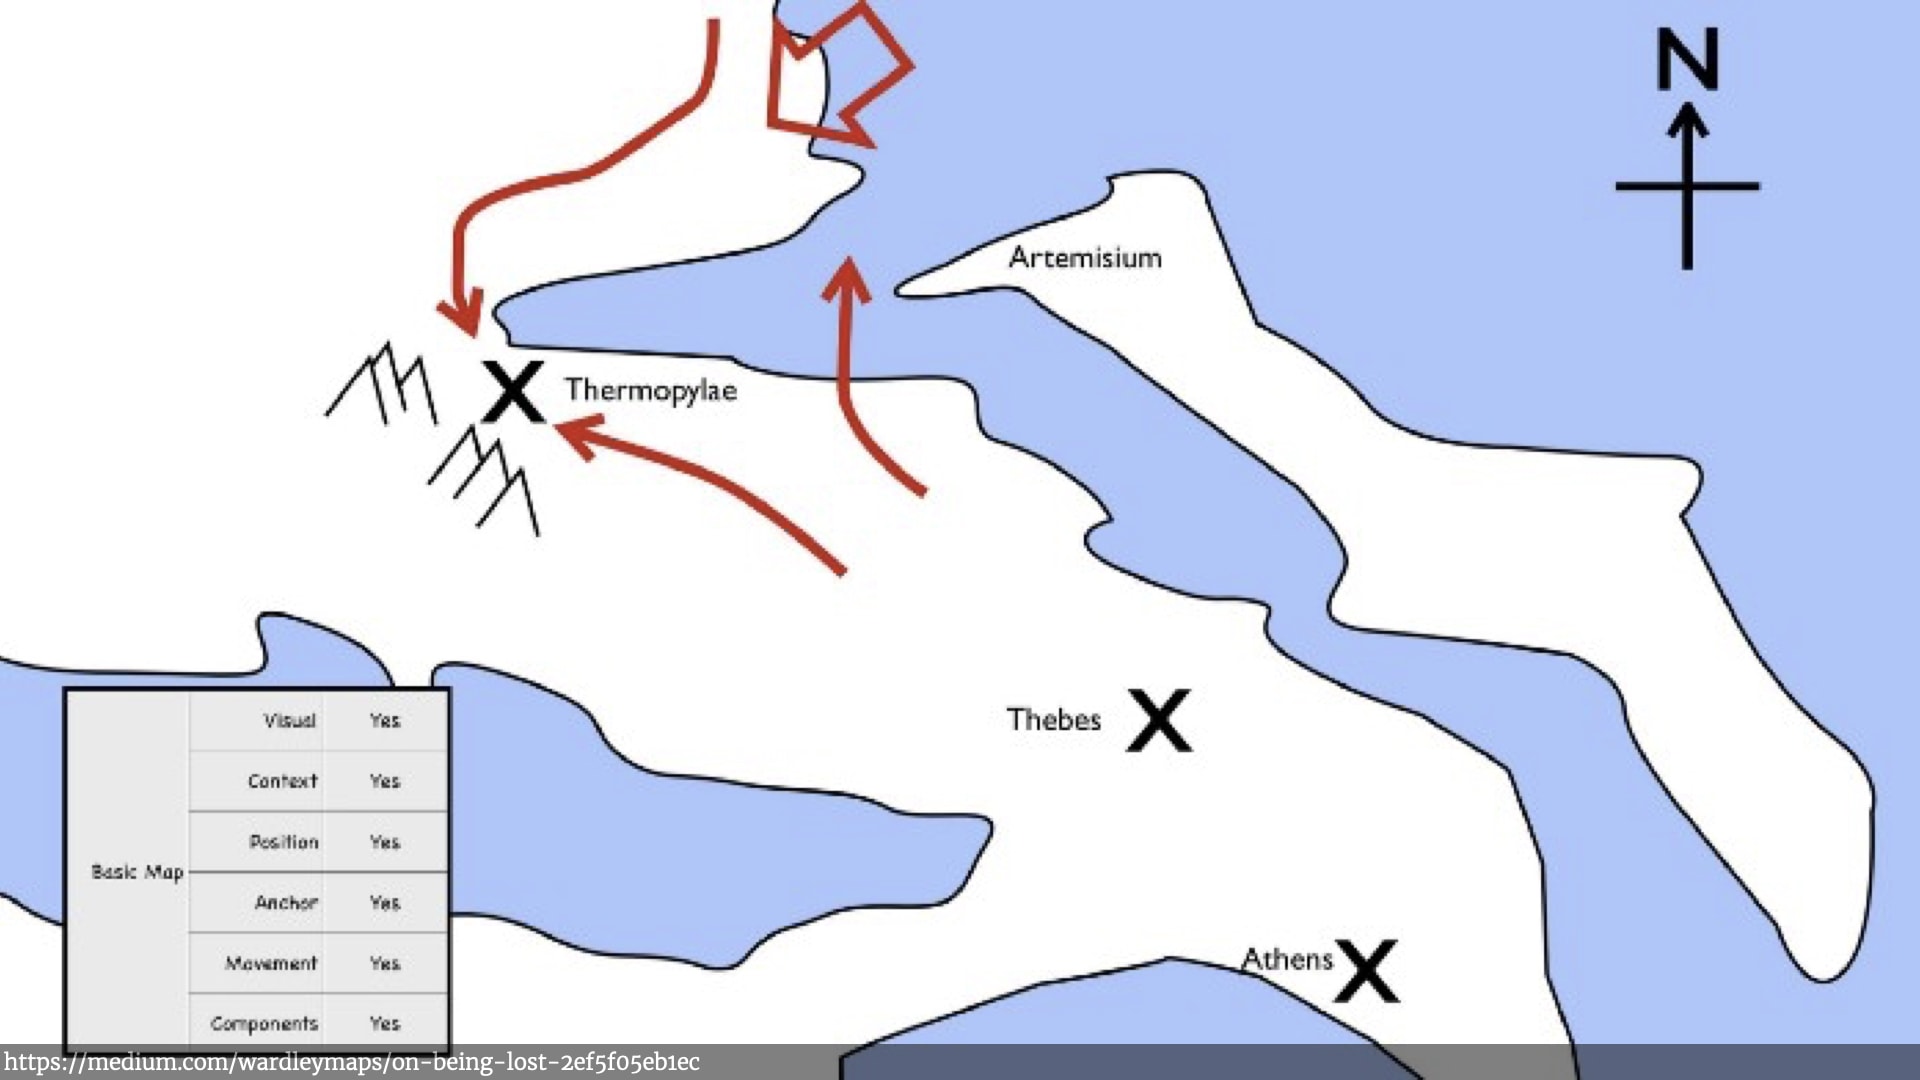 Sketch map of the battle of the pass of Thermopylae; showing how the Persian army was forced along the coastal road into the narrow pass of Thermopylae. In the bottom left is a key indicating that the map is visual, shows context, shows position, has an anchor, shows movement, and has components.